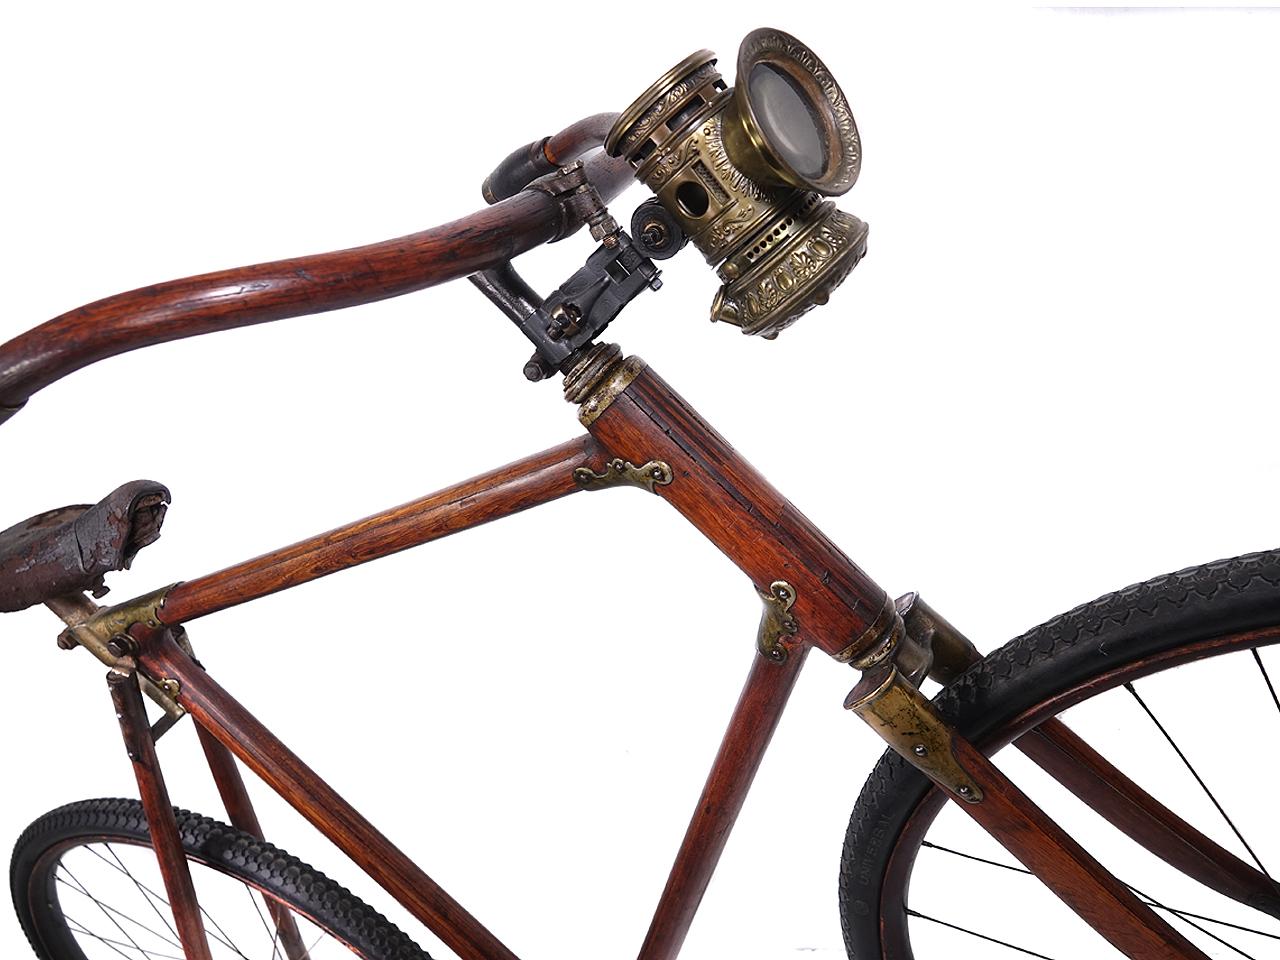 This wooden bicycle is one even a seasoned collector may not know. “The Ligna